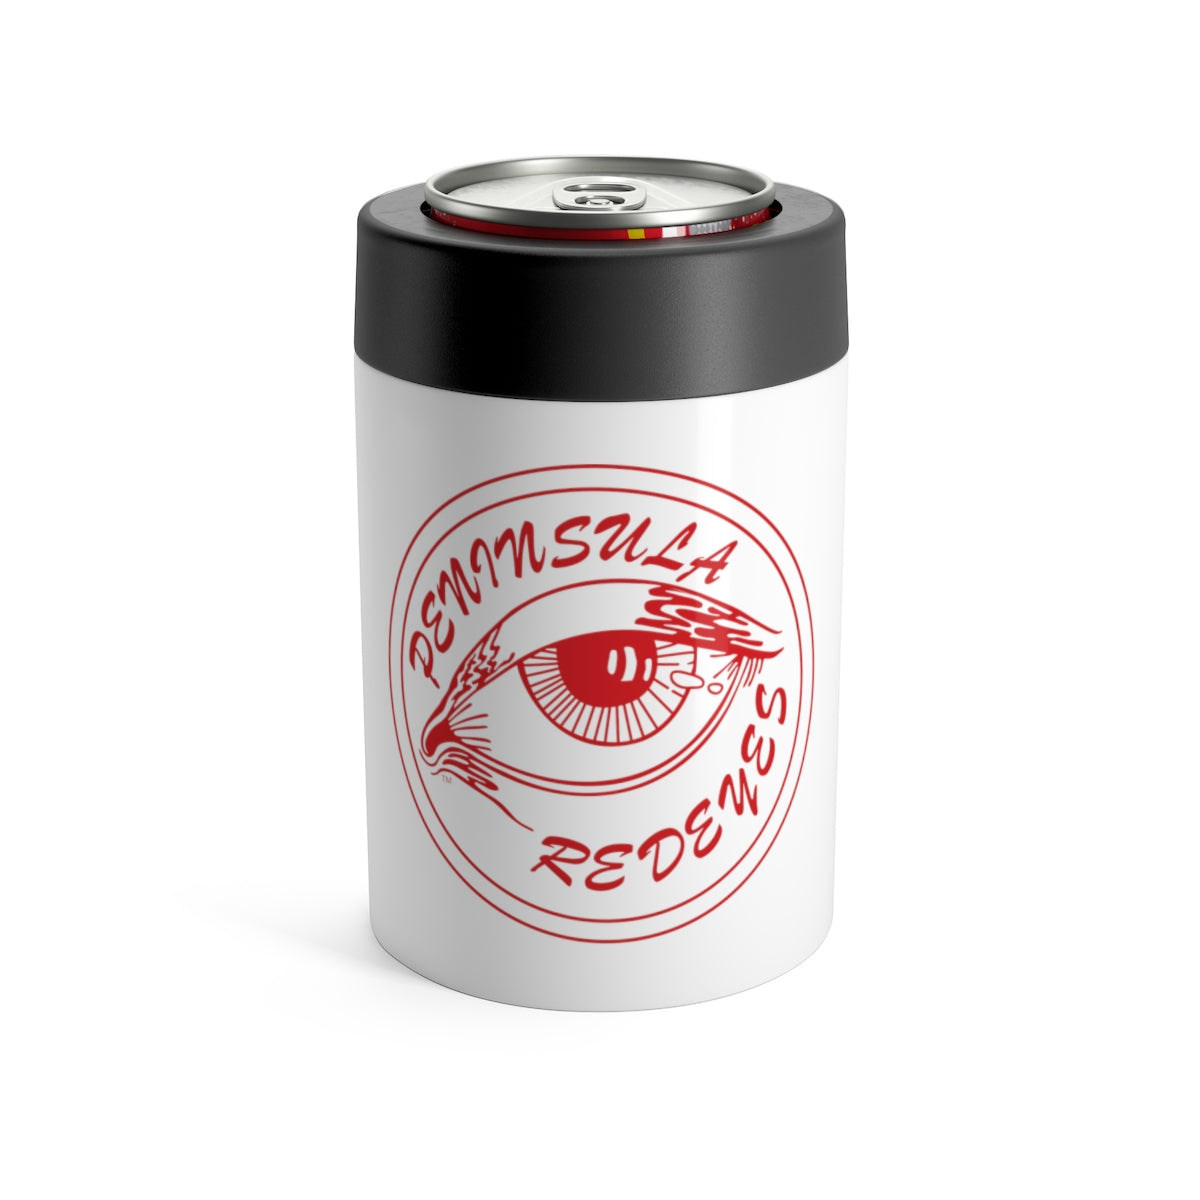 Peninsula Redeyes White Stainless Steel Can Holder